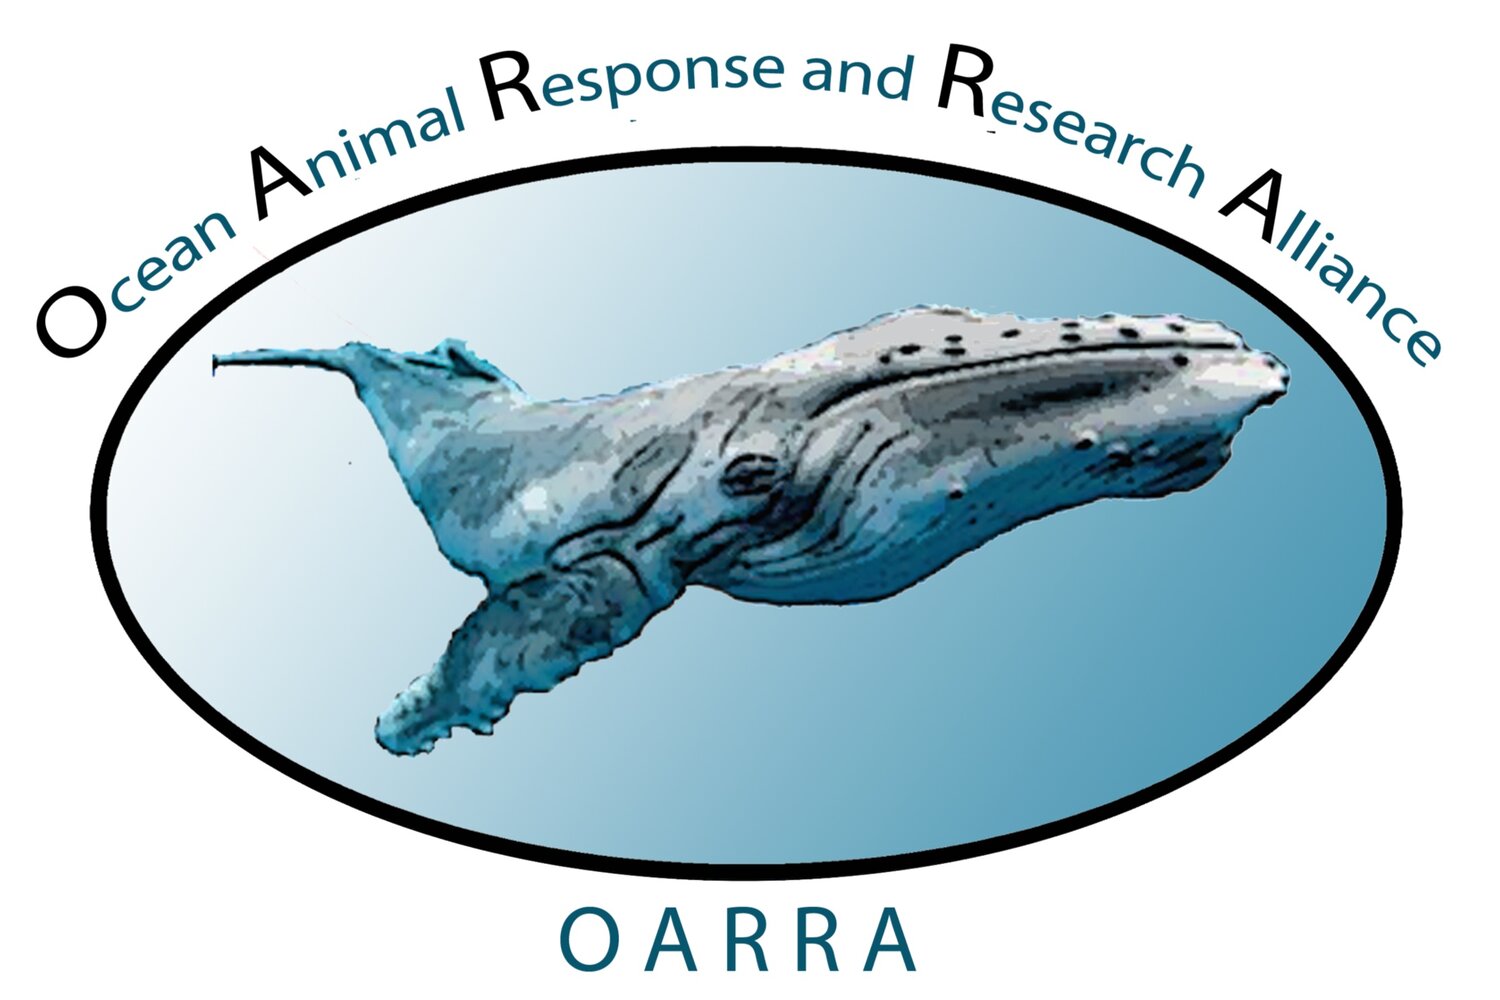 Ocean Animal Response and Research Alliance